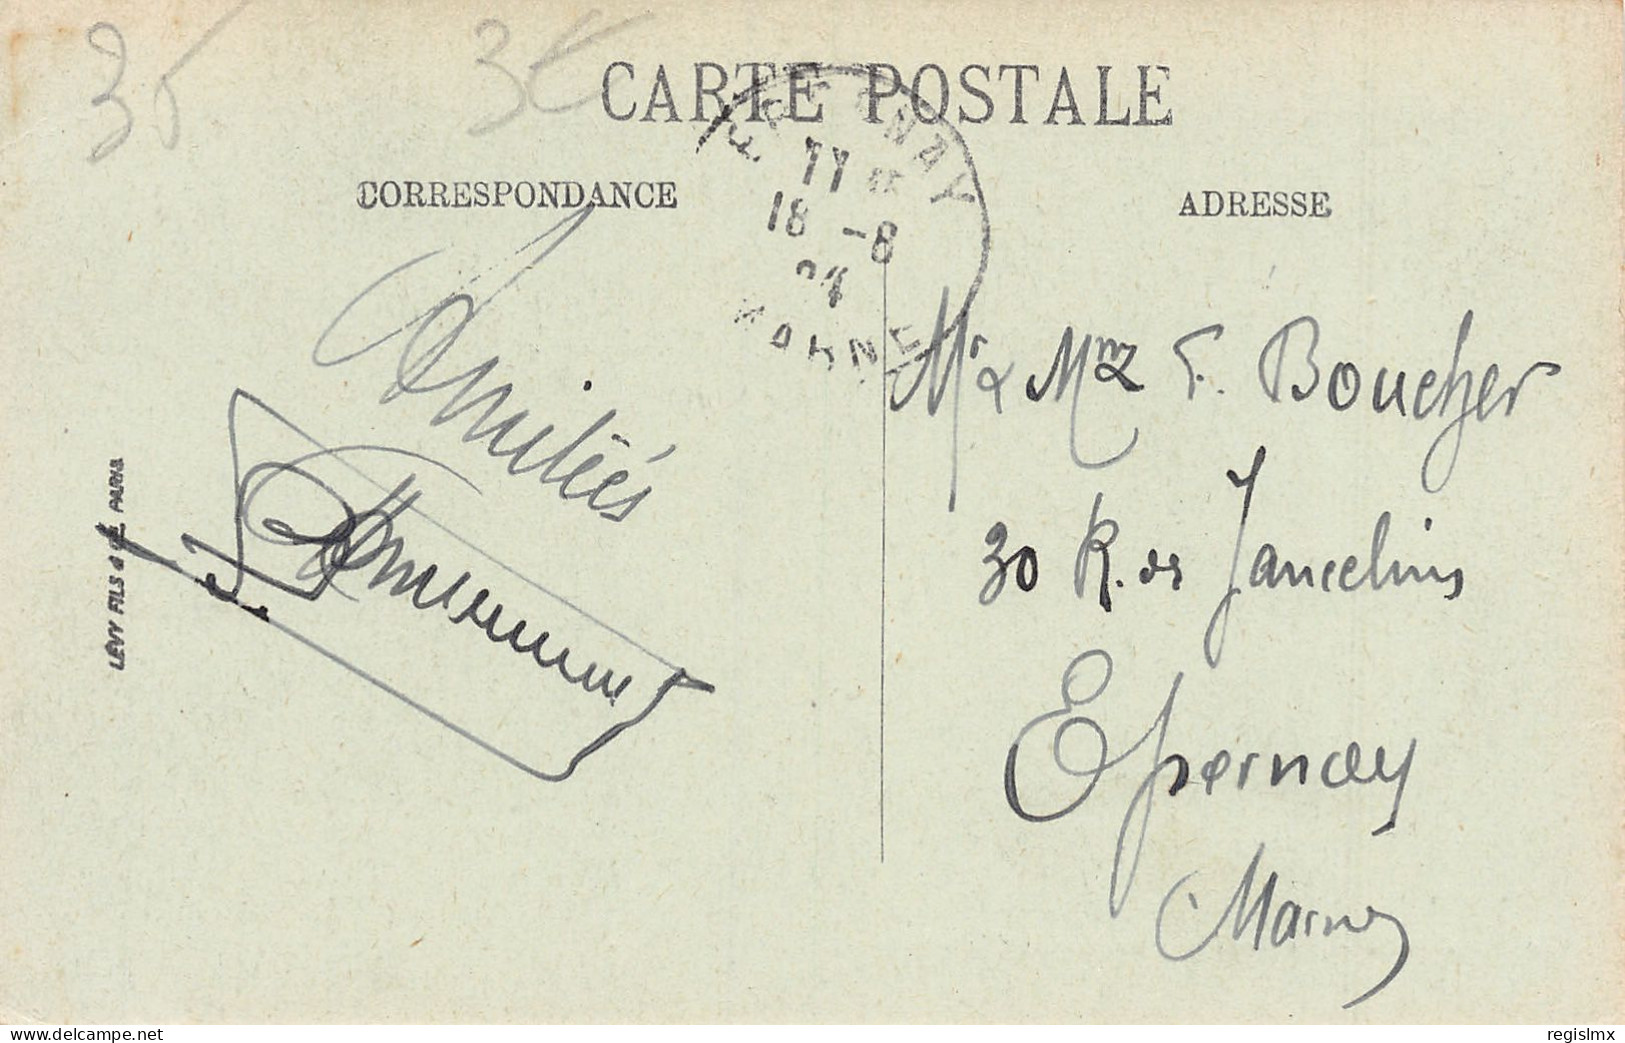 35-FOUGERES-N°T2530-A/0055 - Fougeres